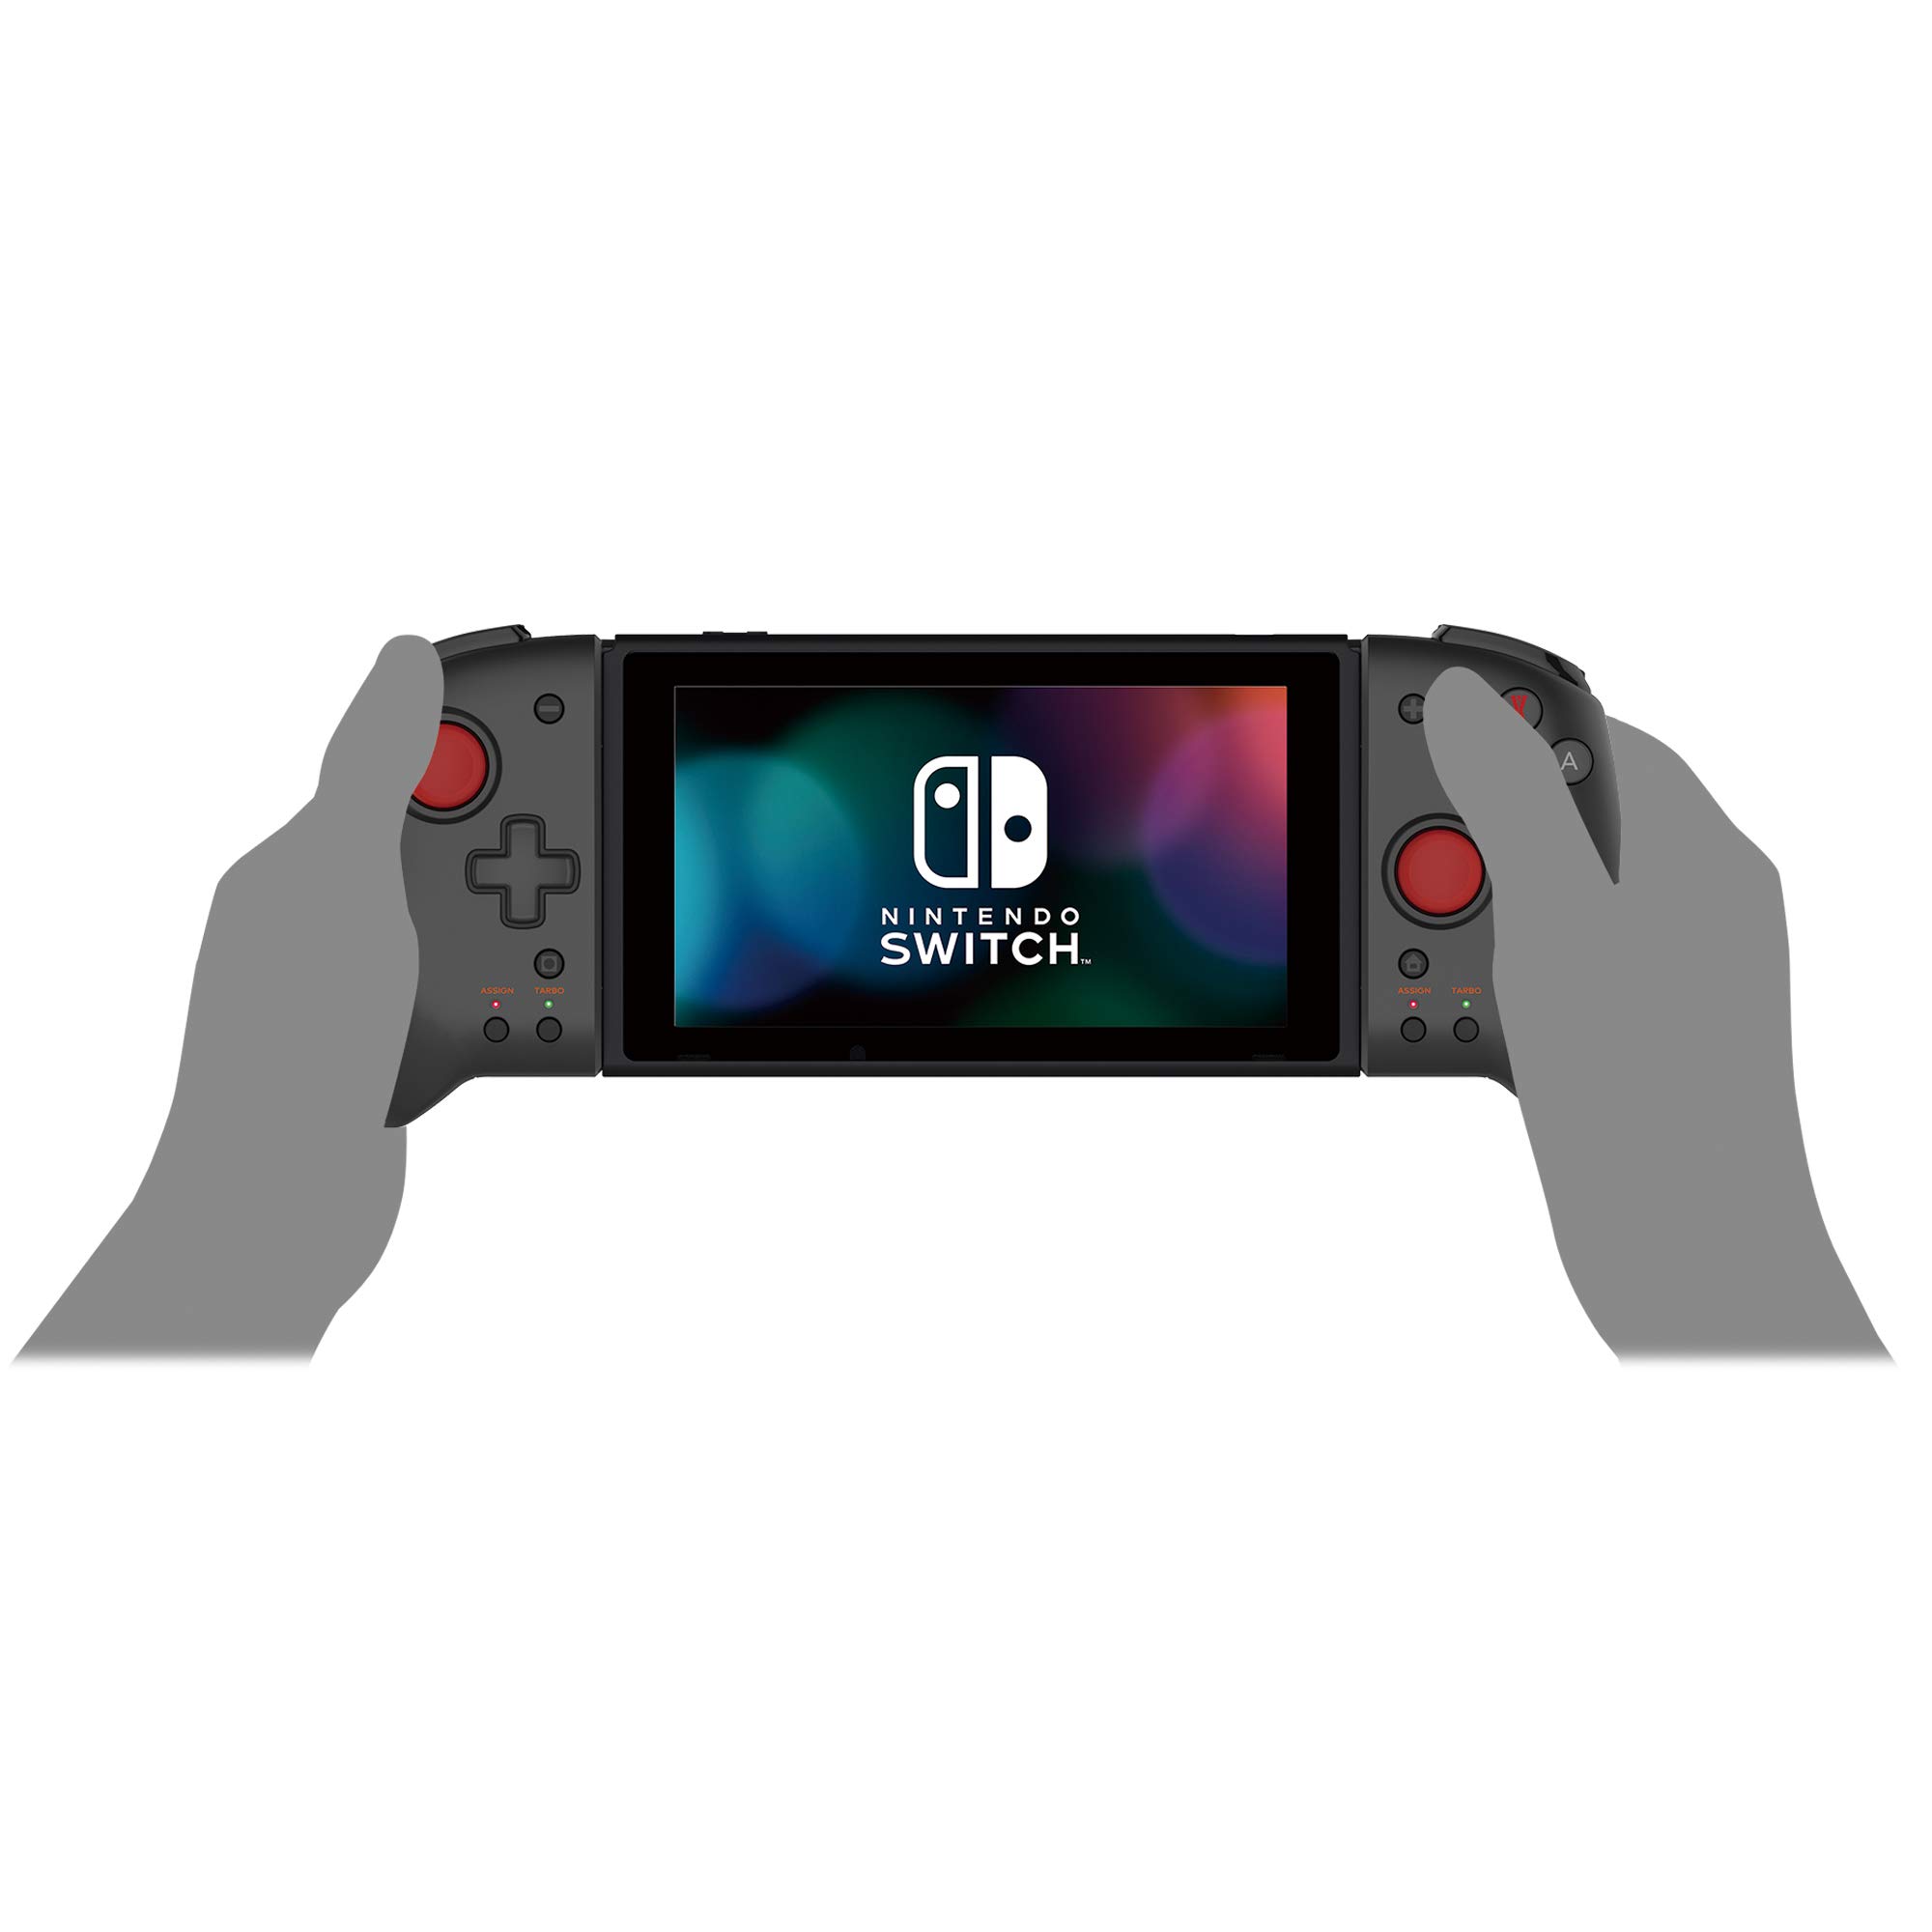 Nintendo Switch Bluetooth Split Pad Pro (Daemon X Machina Edition) Ergonomic Controller for Handheld Mode - Officially Licensed By Nintendo